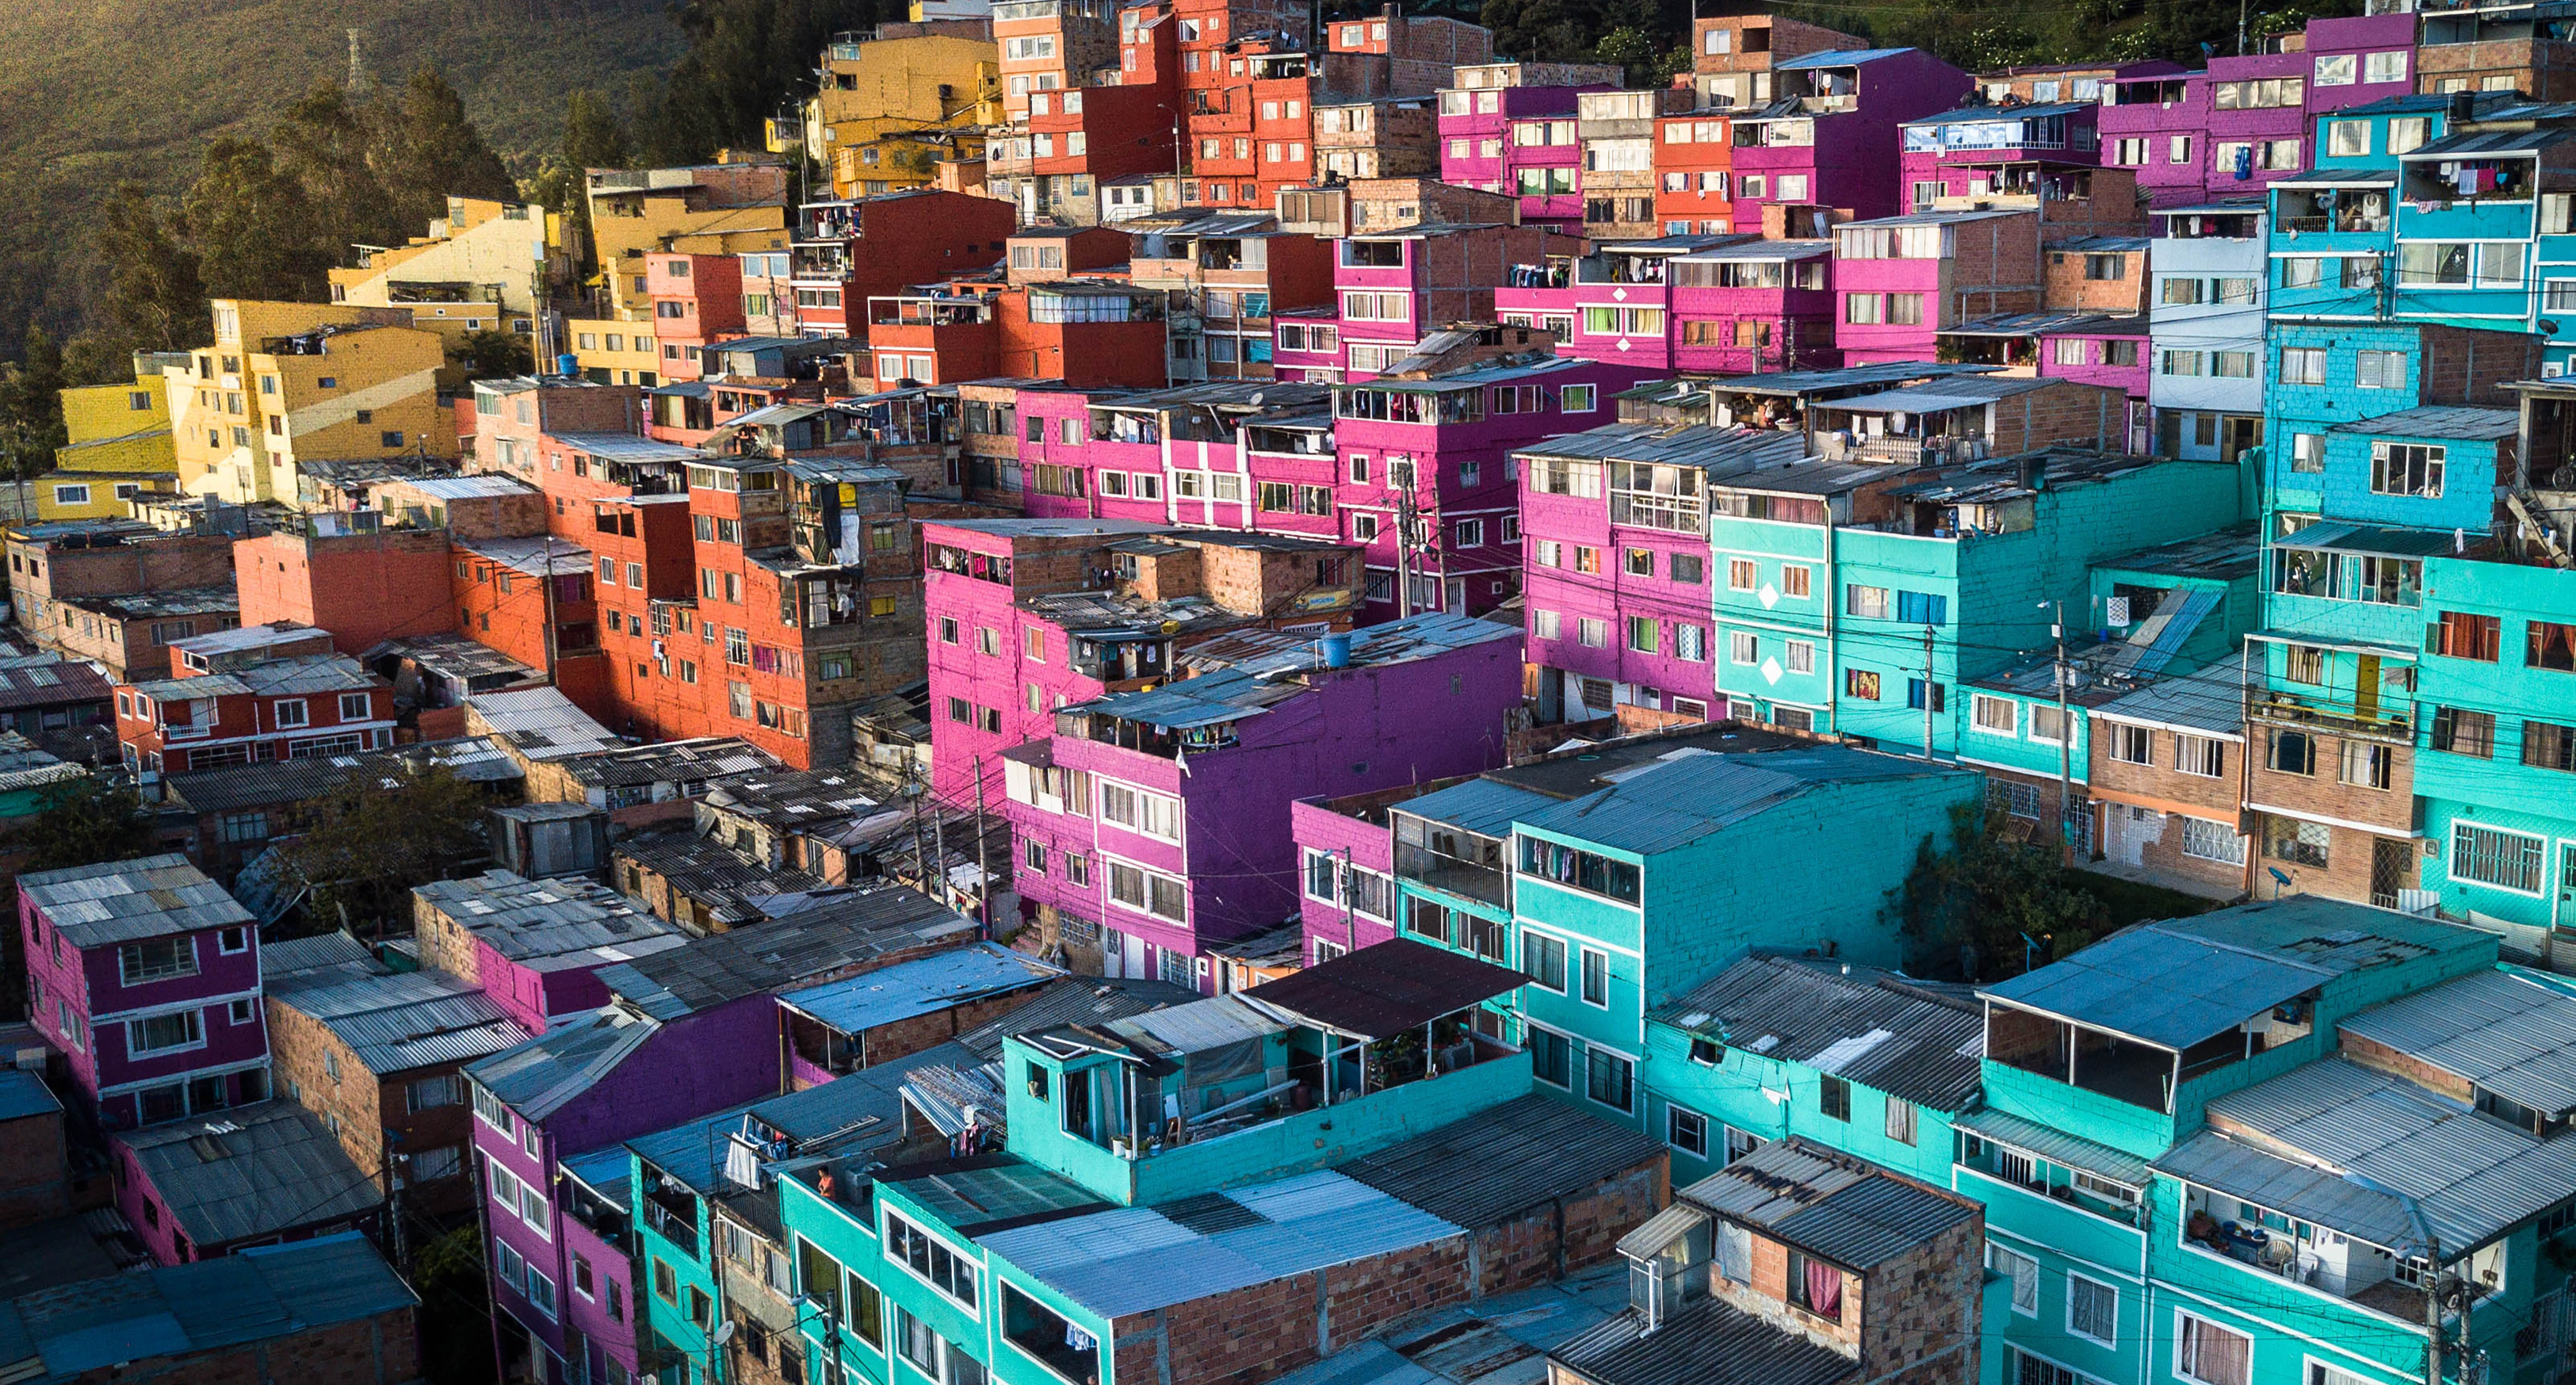 Houses on a hill painted bright colors